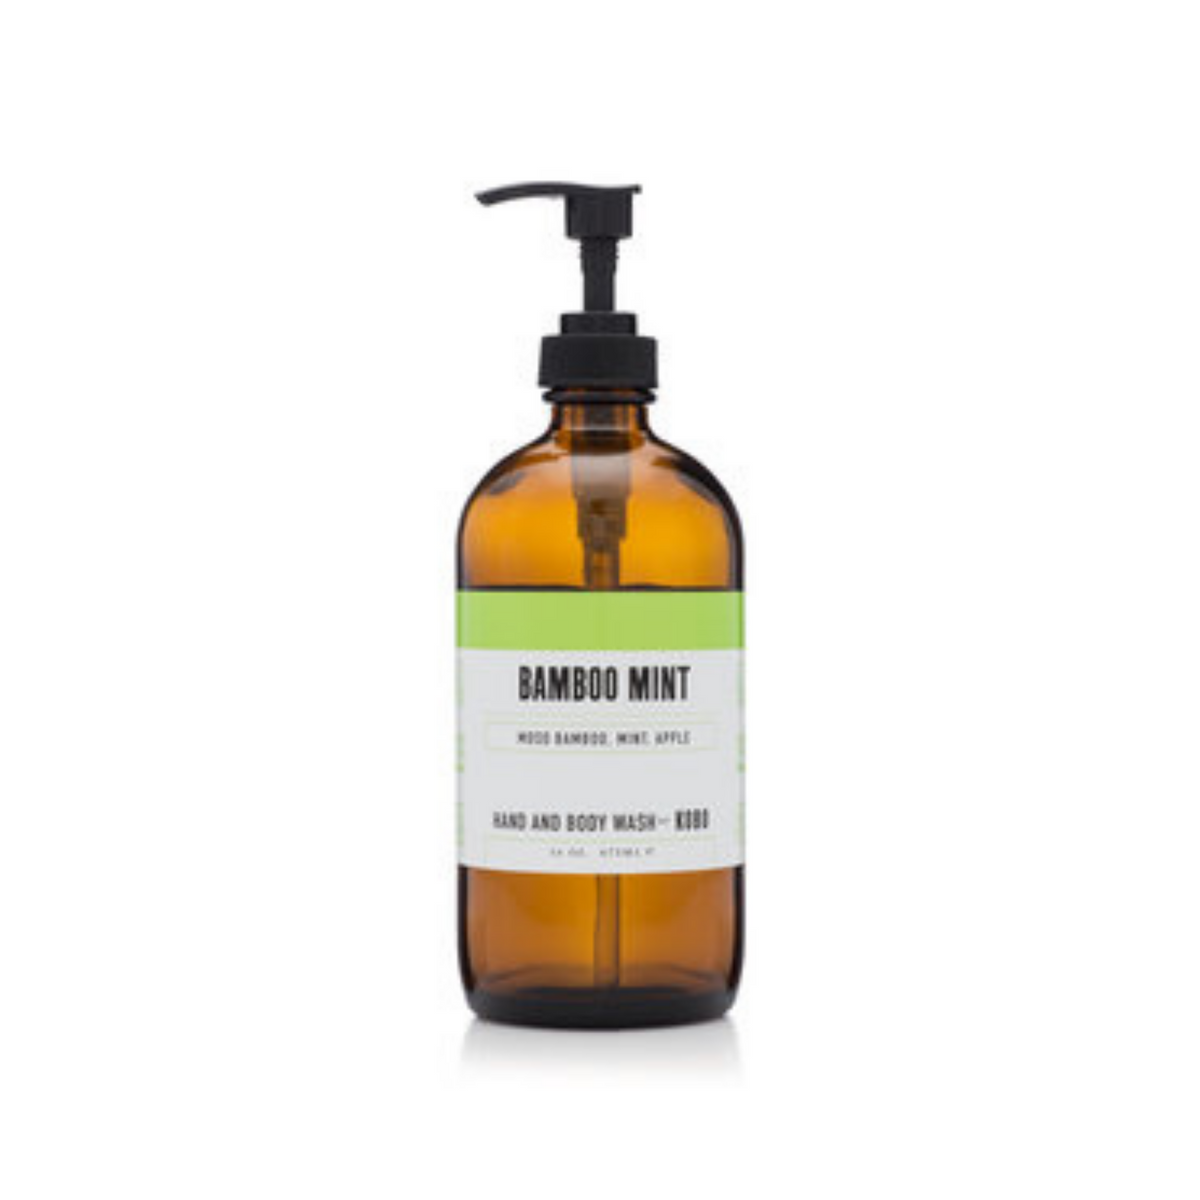 Primary Image of Bamboo mint Hand and body wash